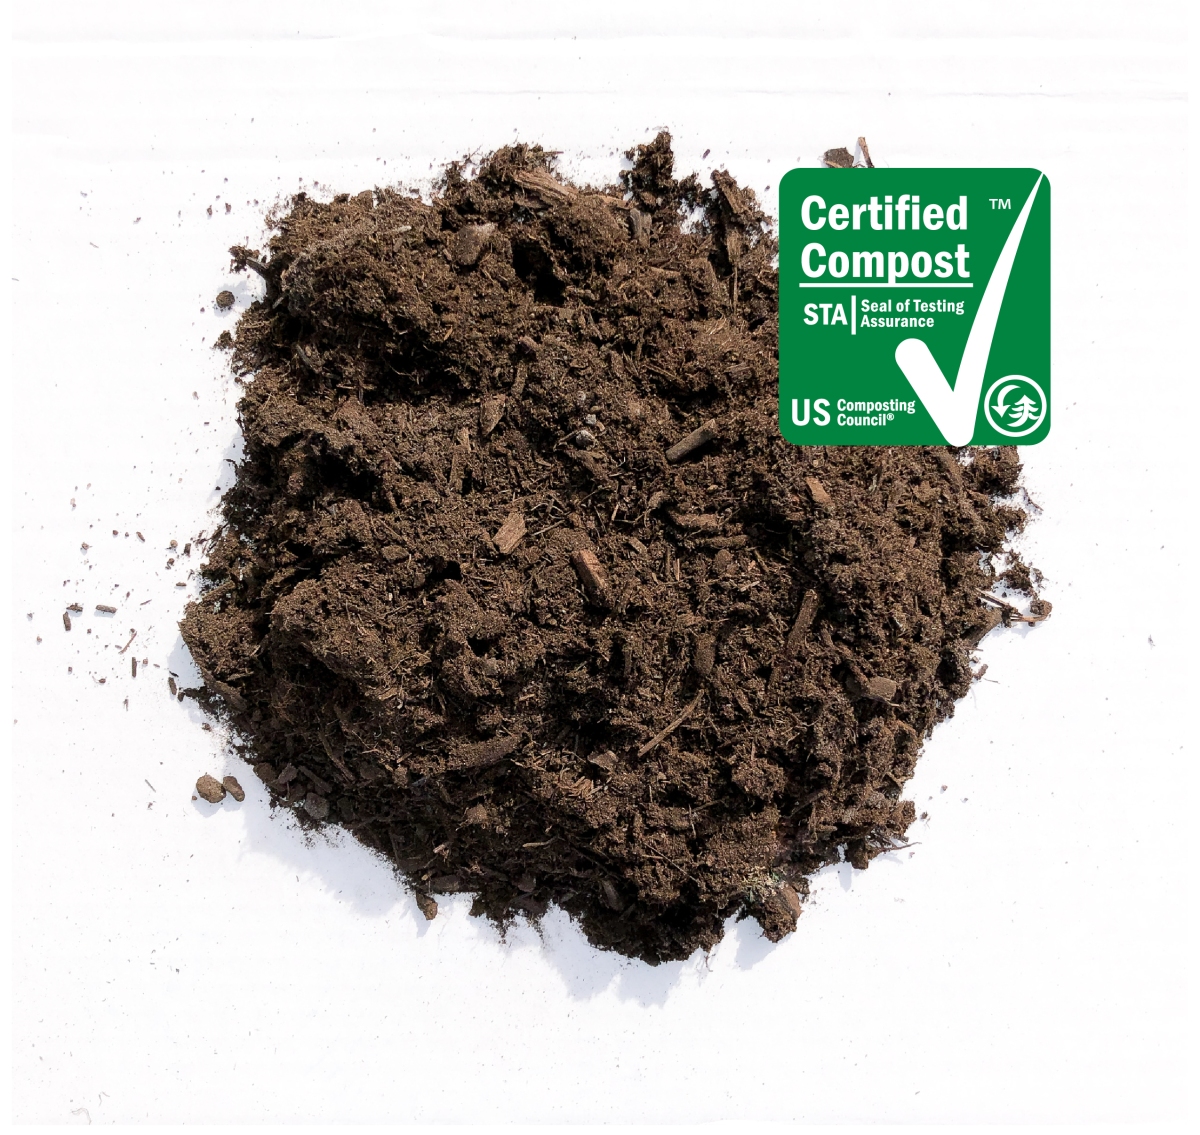 Organic fertilizer – what is it, what are the rules, where do you buy it?